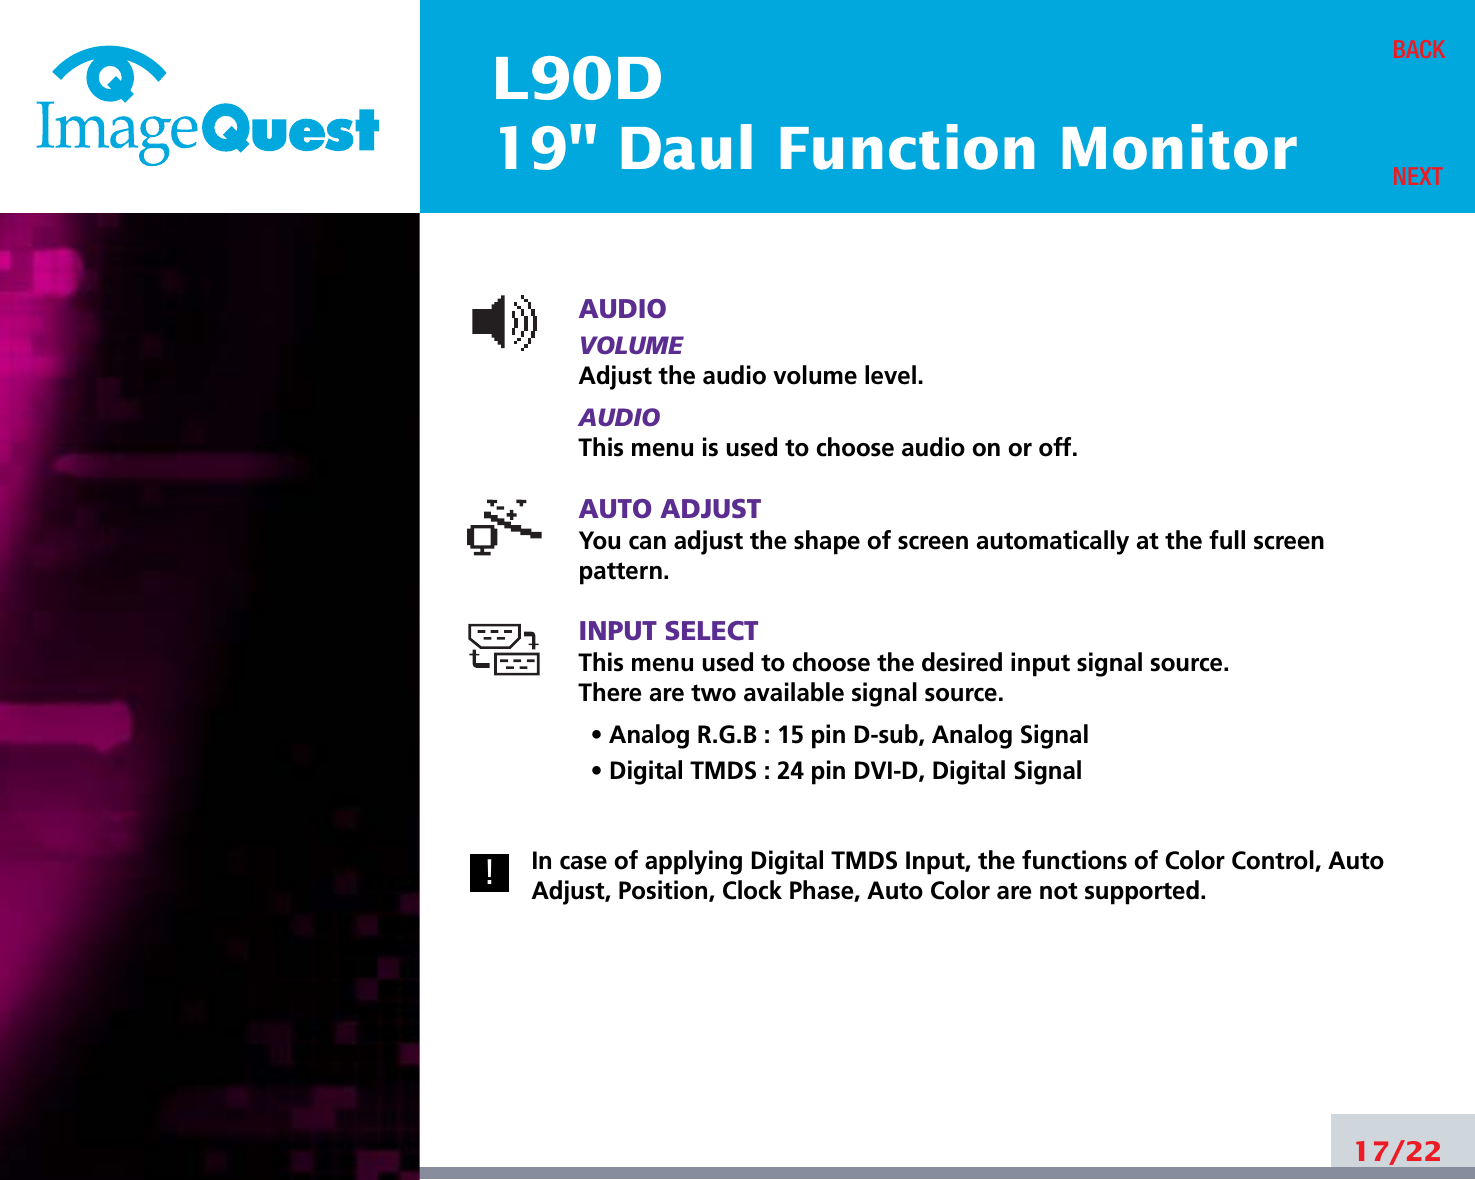 L90D19&quot; Daul Function MonitorAUDIOVOLUMEAdjust the audio volume level.AUDIOThis menu is used to choose audio on or off.AUTO ADJUSTYou can adjust the shape of screen automatically at the full screenpattern.INPUT SELECTThis menu used to choose the desired input signal source.There are two available signal source.• Analog R.G.B : 15 pin D-sub, Analog Signal• Digital TMDS : 24 pin DVI-D, Digital SignalIn case of applying Digital TMDS Input, the functions of Color Control, AutoAdjust, Position, Clock Phase, Auto Color are not supported.17/22BACKNEXT!